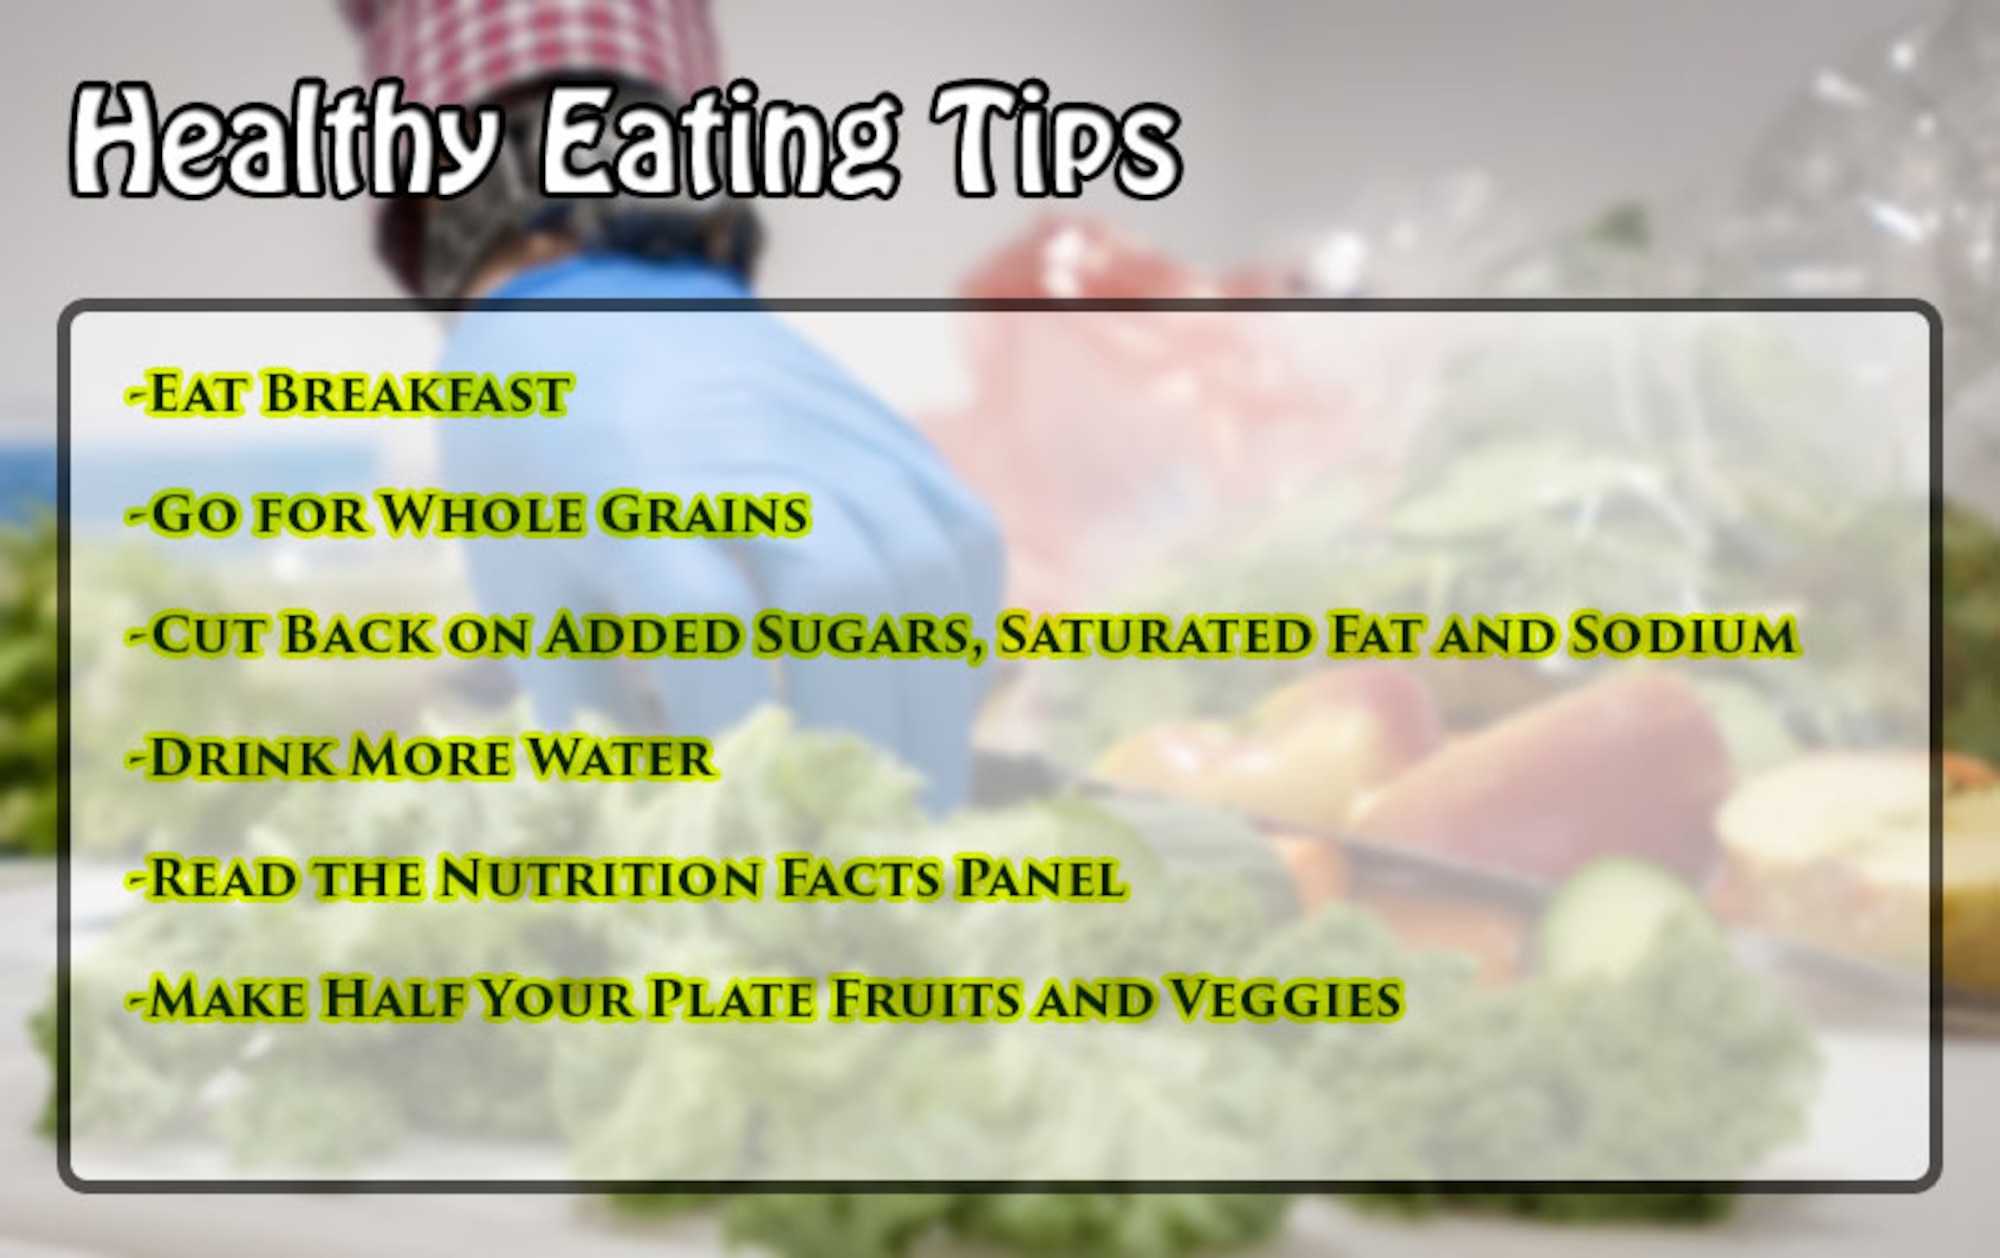 March is National Nutrition Month. Taking steps to improve your diet, such as eating more fruits and vegetables or cutting back on sugar, can benefit your overall physical health. (U.S. Air Force graphic by Airman 1st Class Destinee Sweeney)